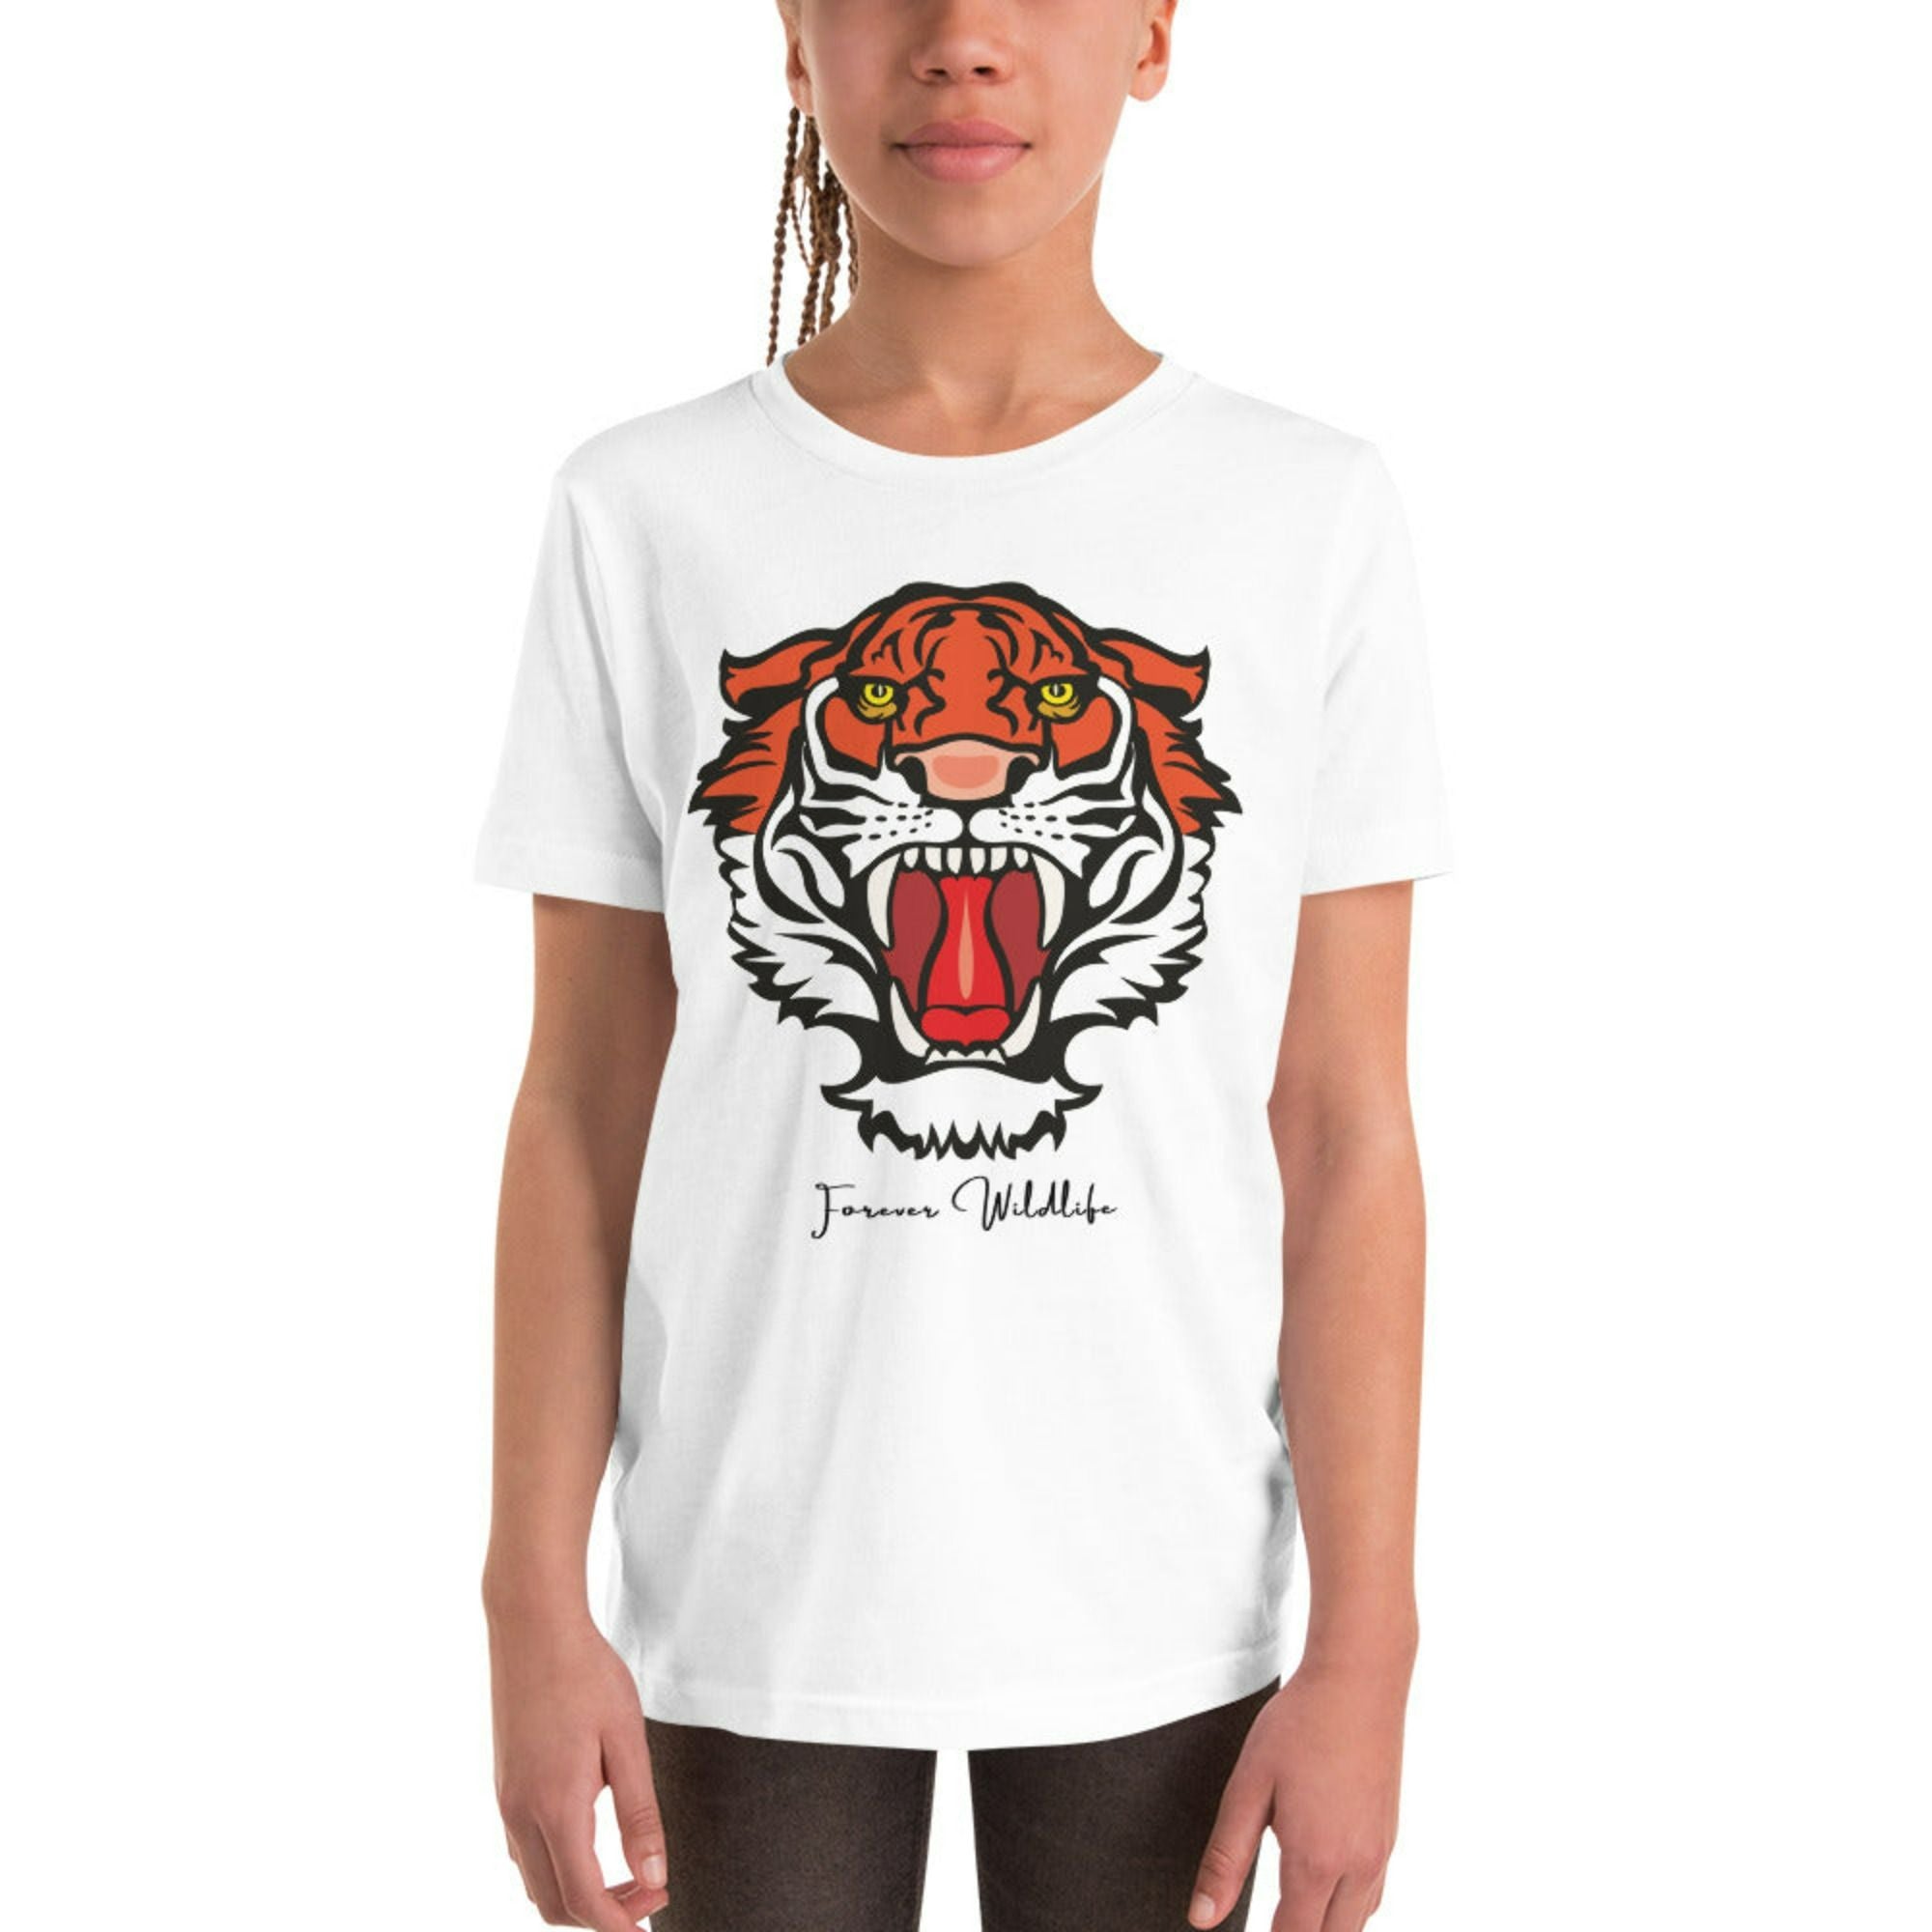 Teen wearing White Youth T-Shirt with Tiger graphic as part of Wildlife T Shirts, Wildlife Clothing & Apparel by Forever Wildlife